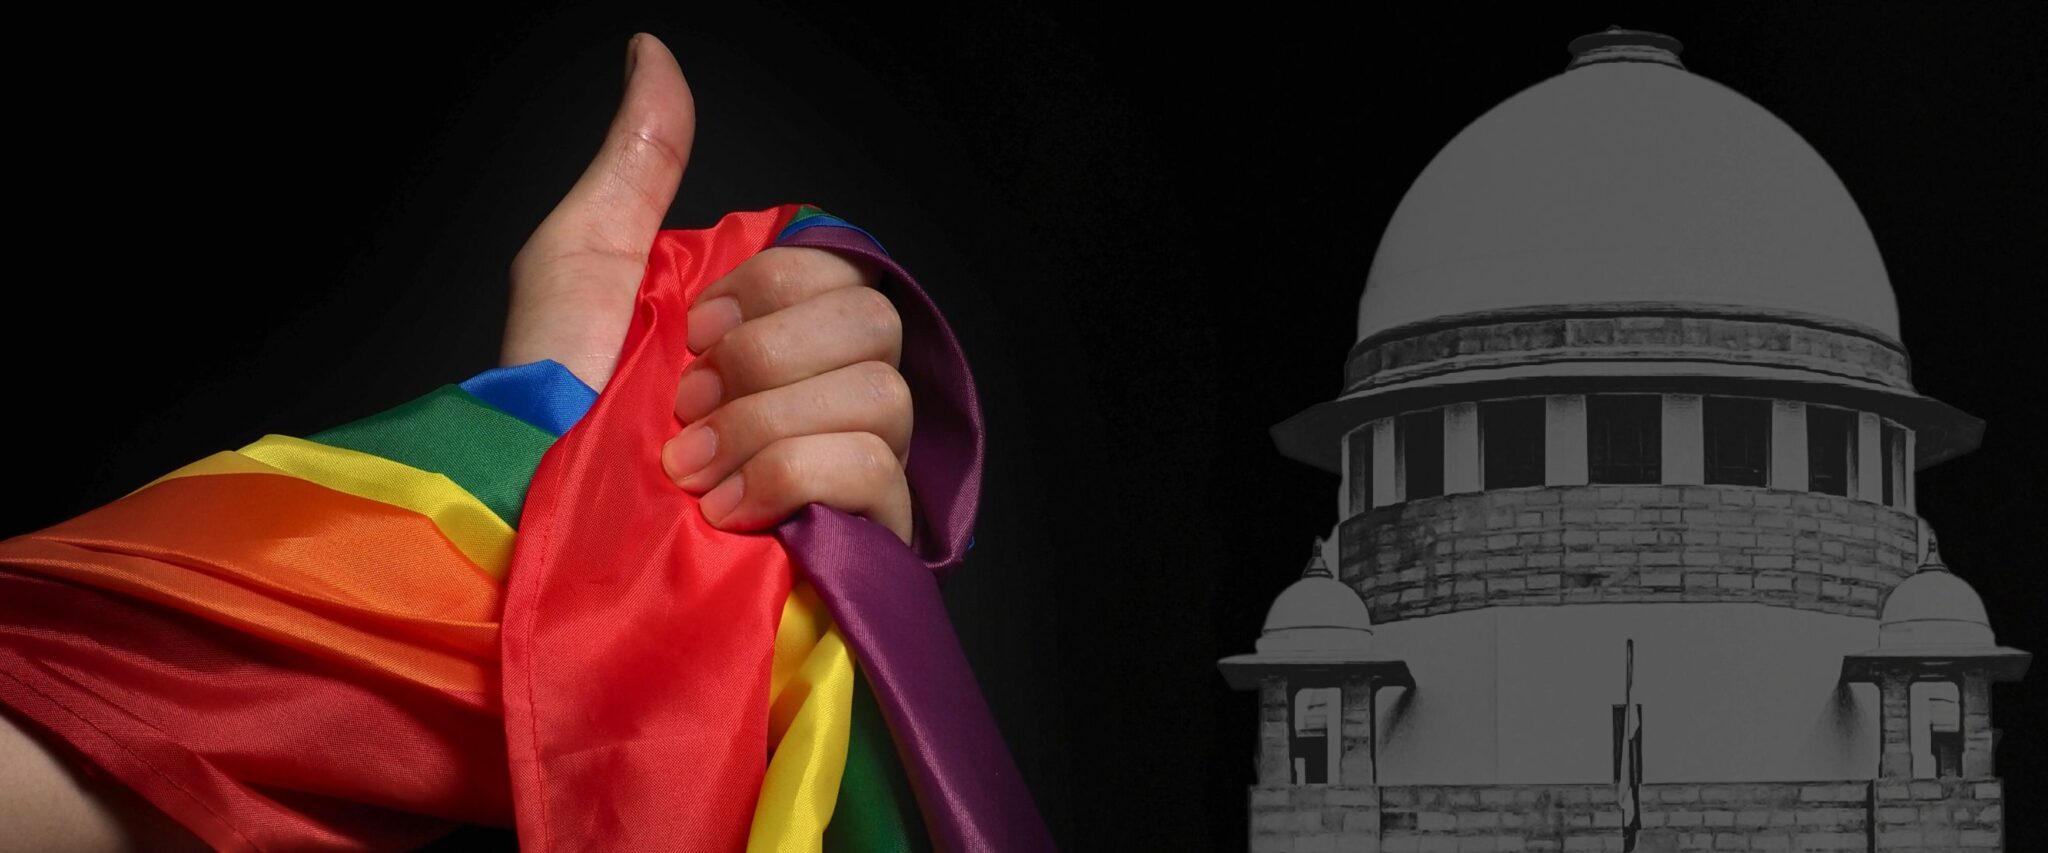 Marriage Equality: The courts were not the right forum to approach